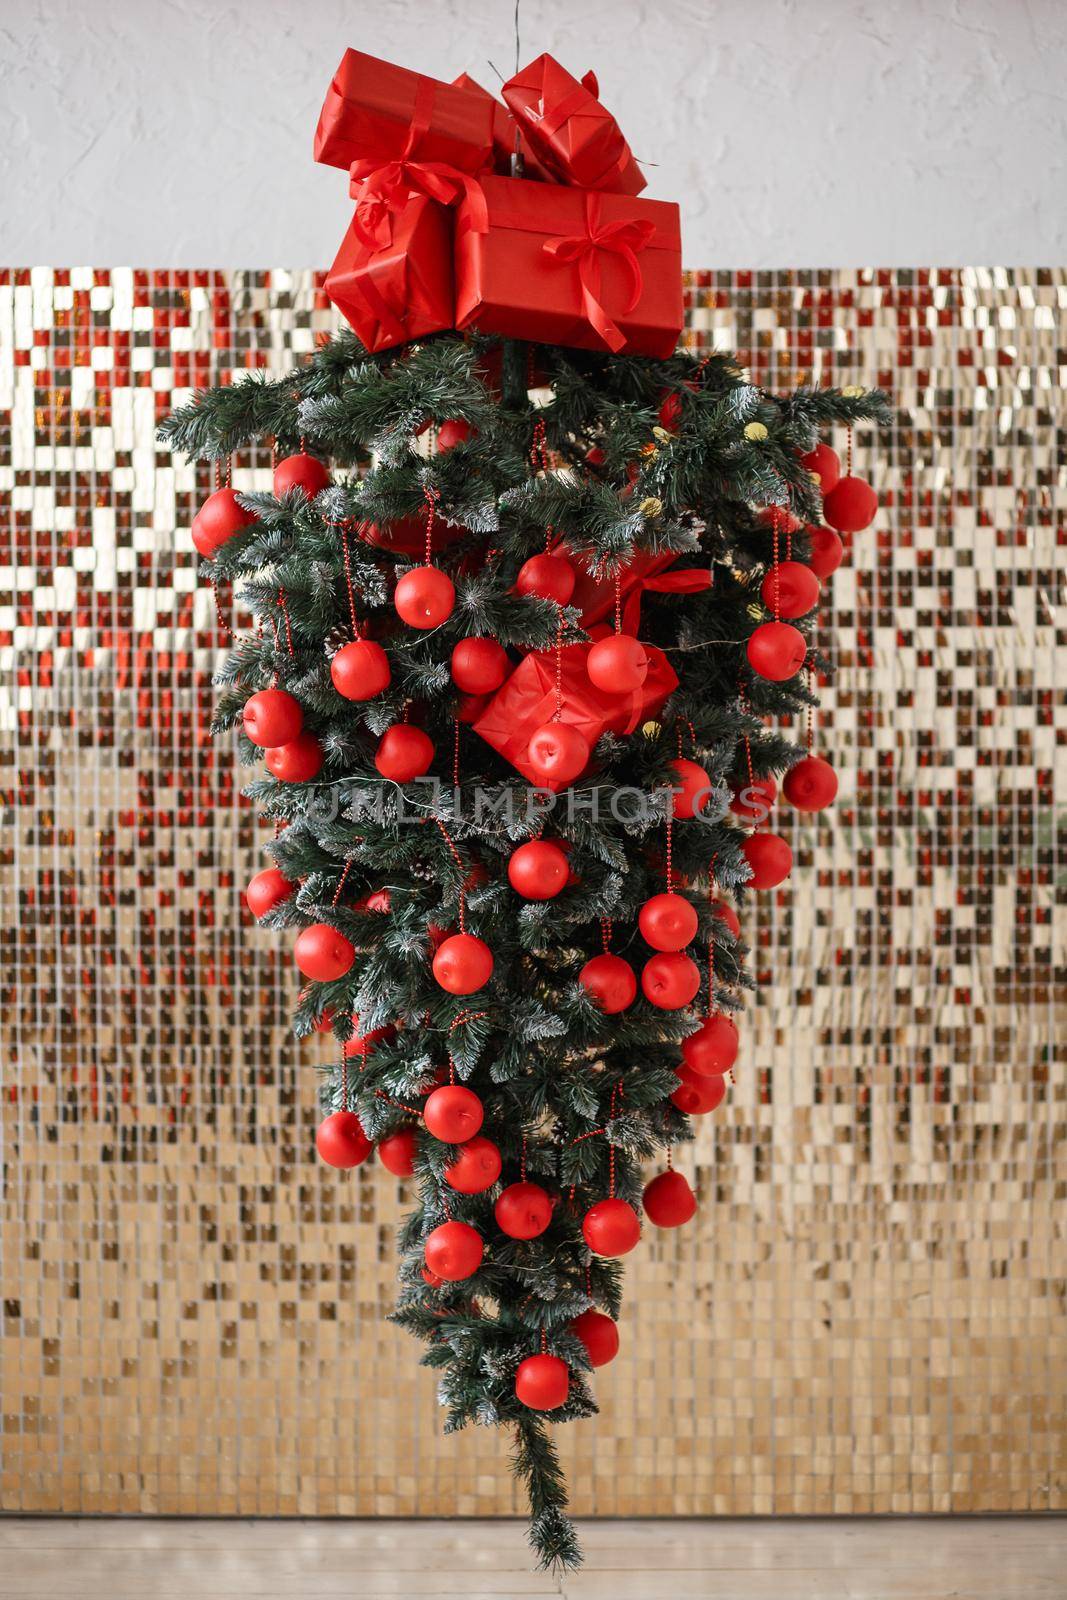 An inverted Christmas tree hanging in the air Art object.